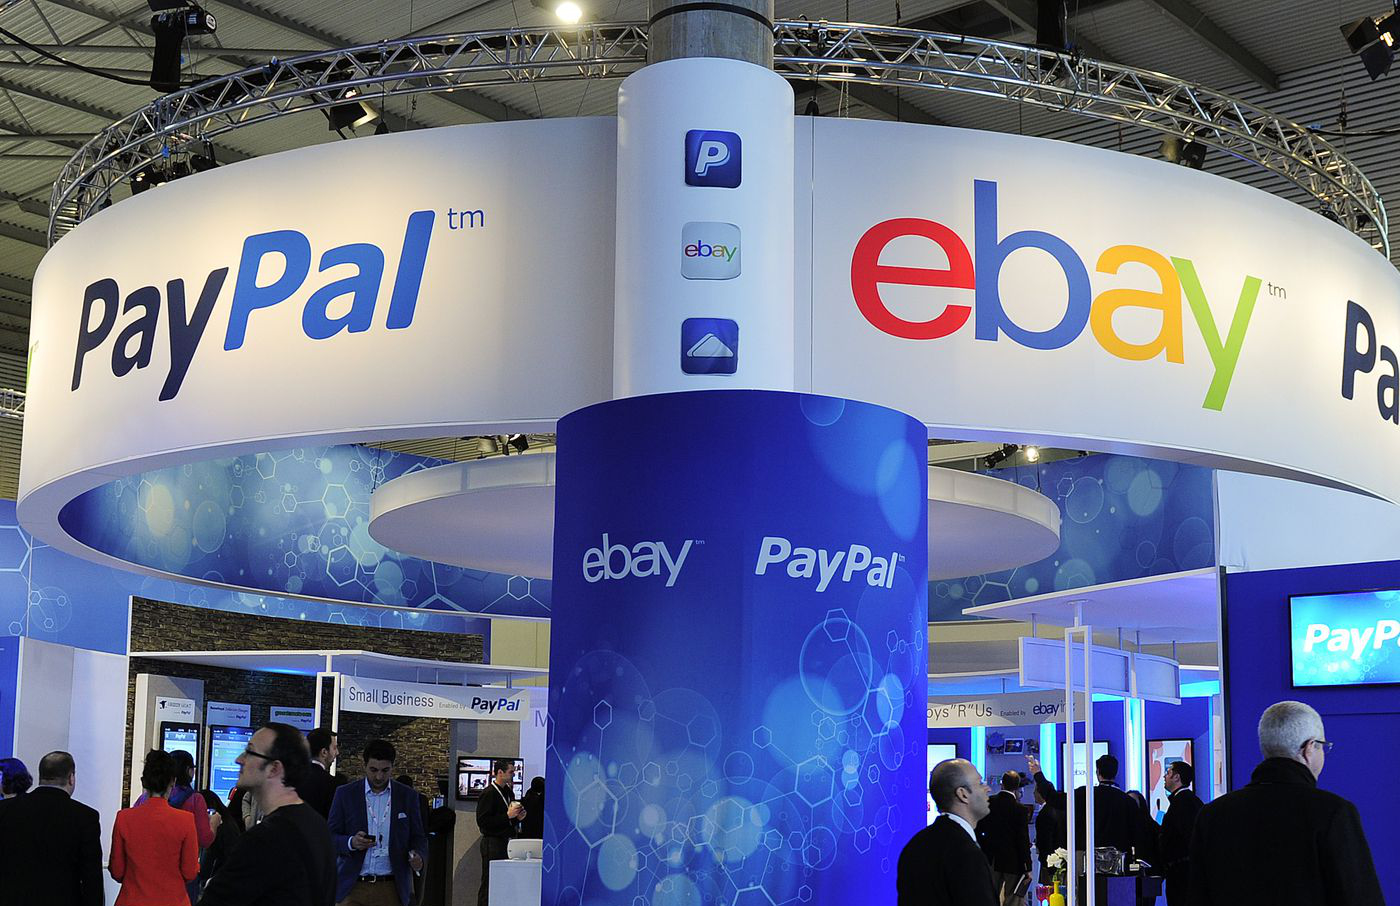 Bitcoin to Add $1 Billion in Revenue to PayPal Says Analyst